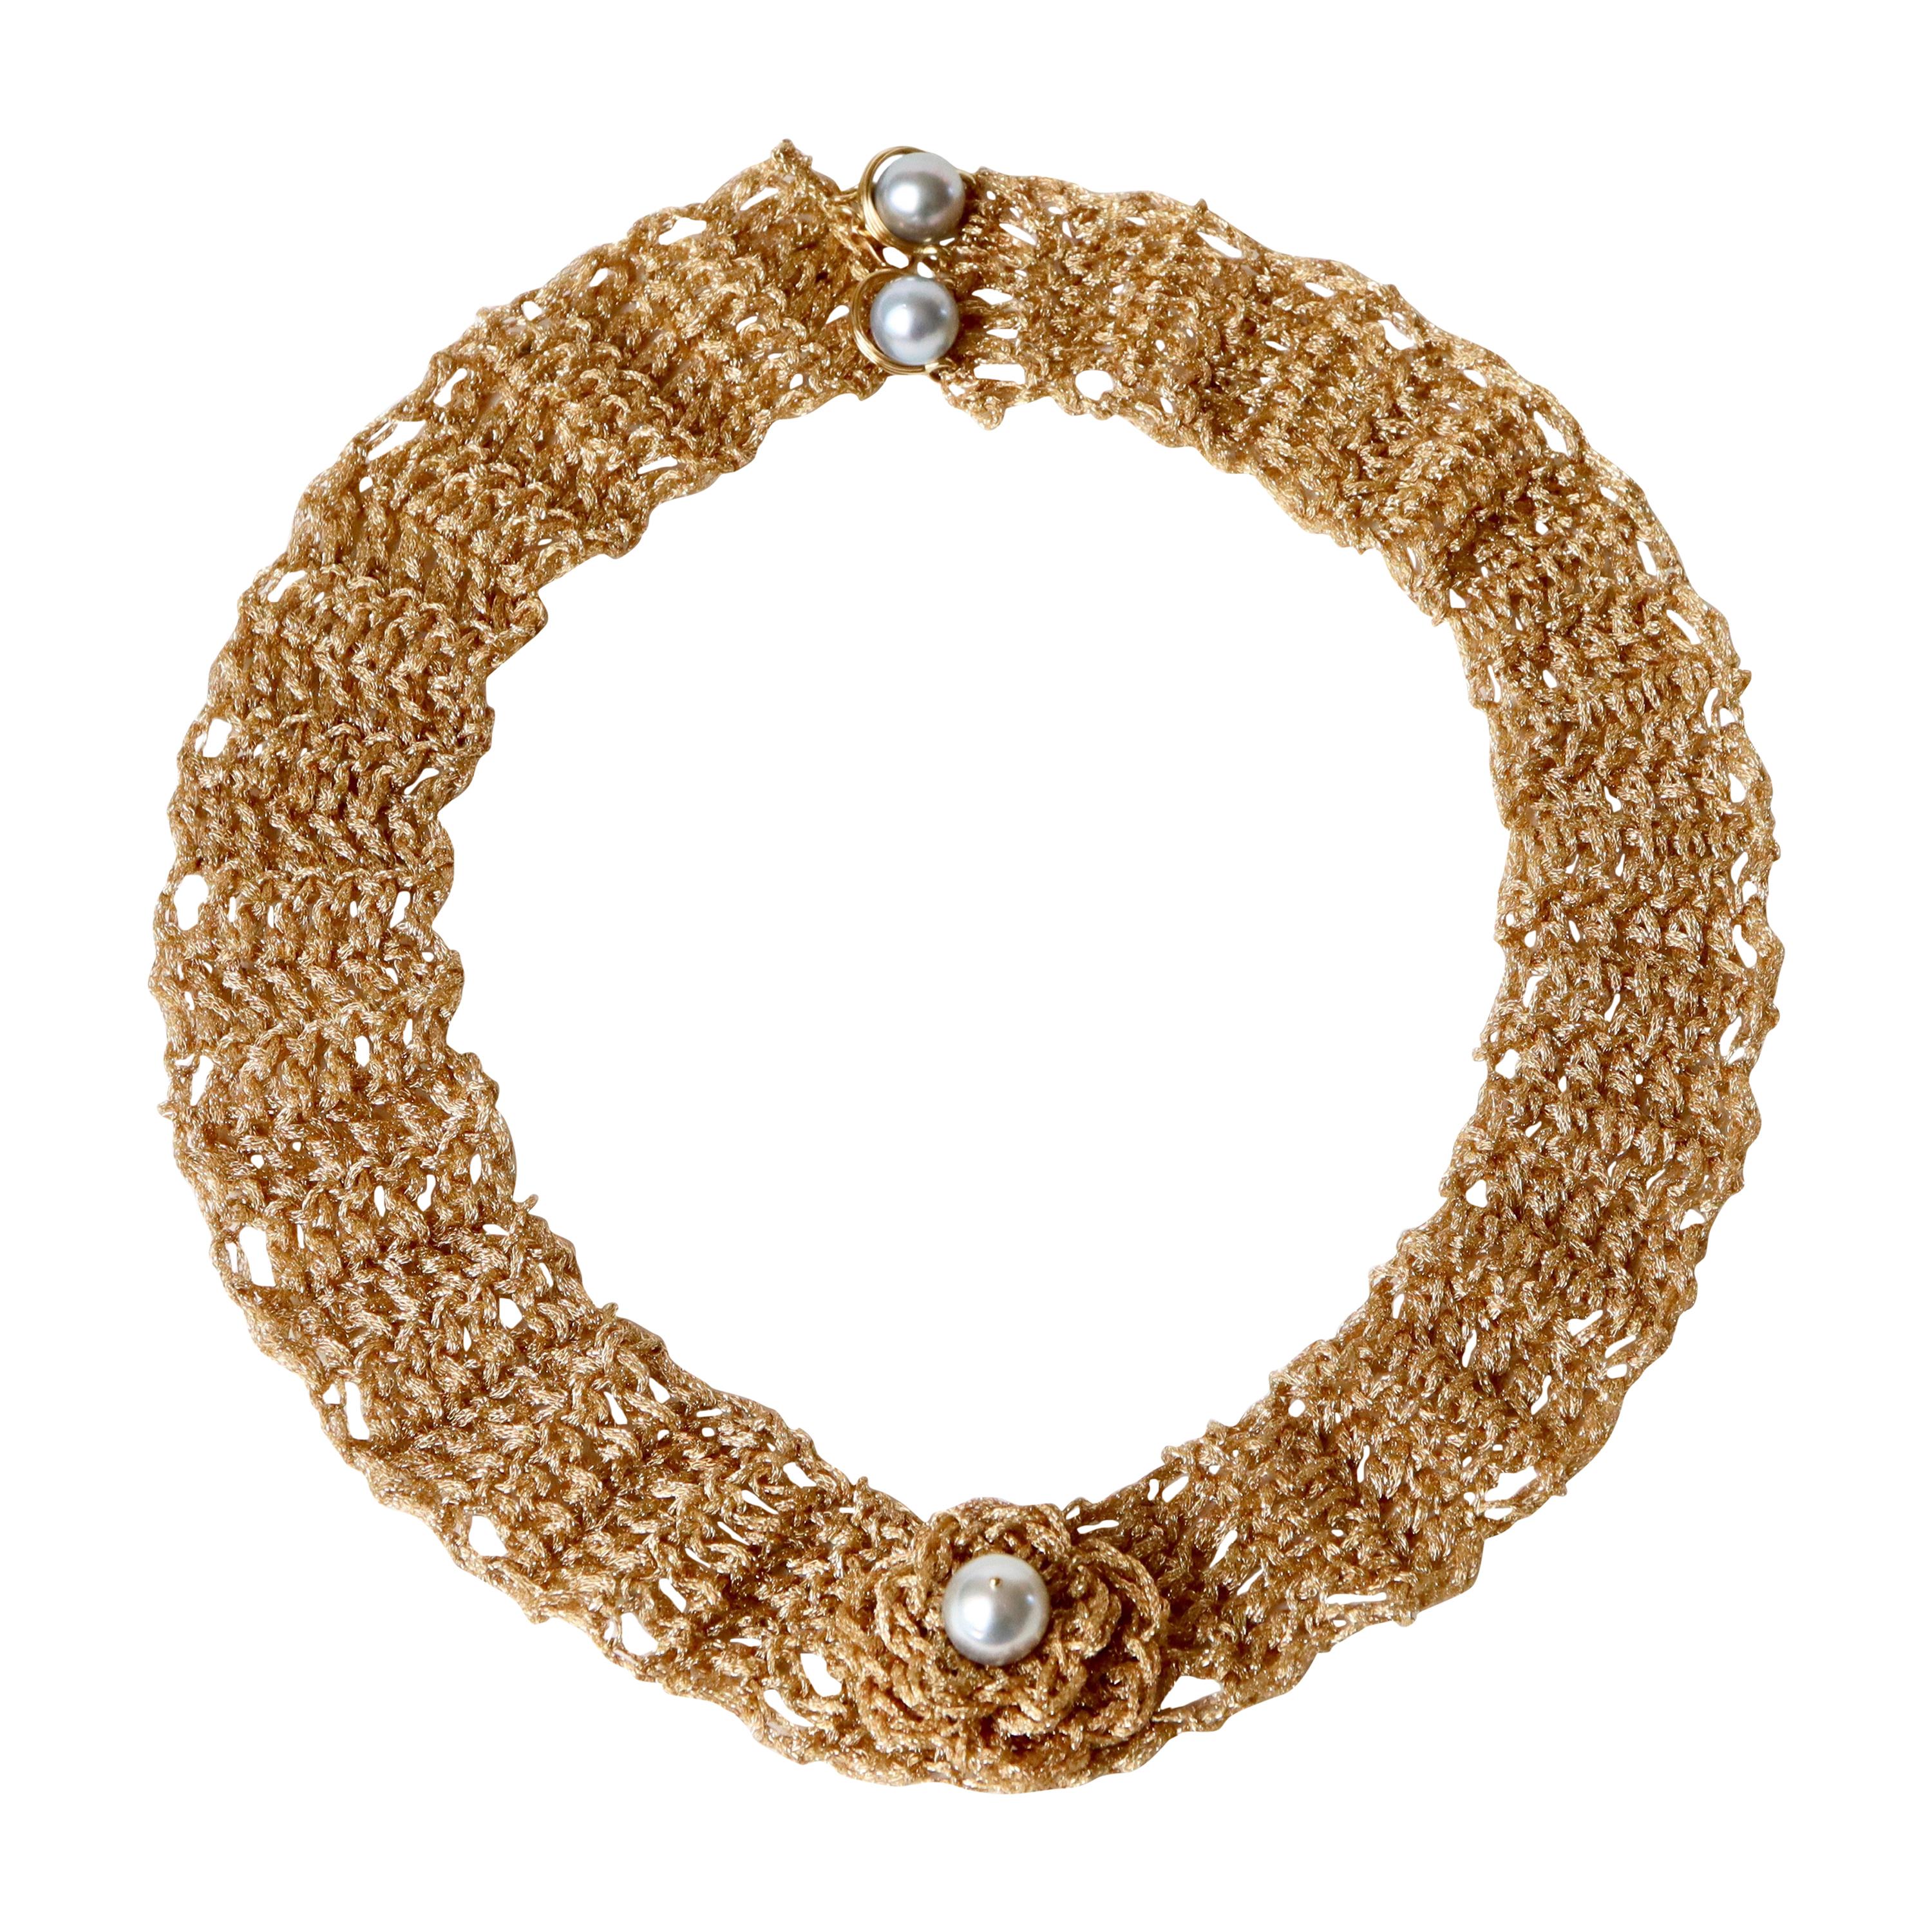 Important Necklace in 18 Karat Gold Knitted Gold Thread adorned with Pearls For Sale